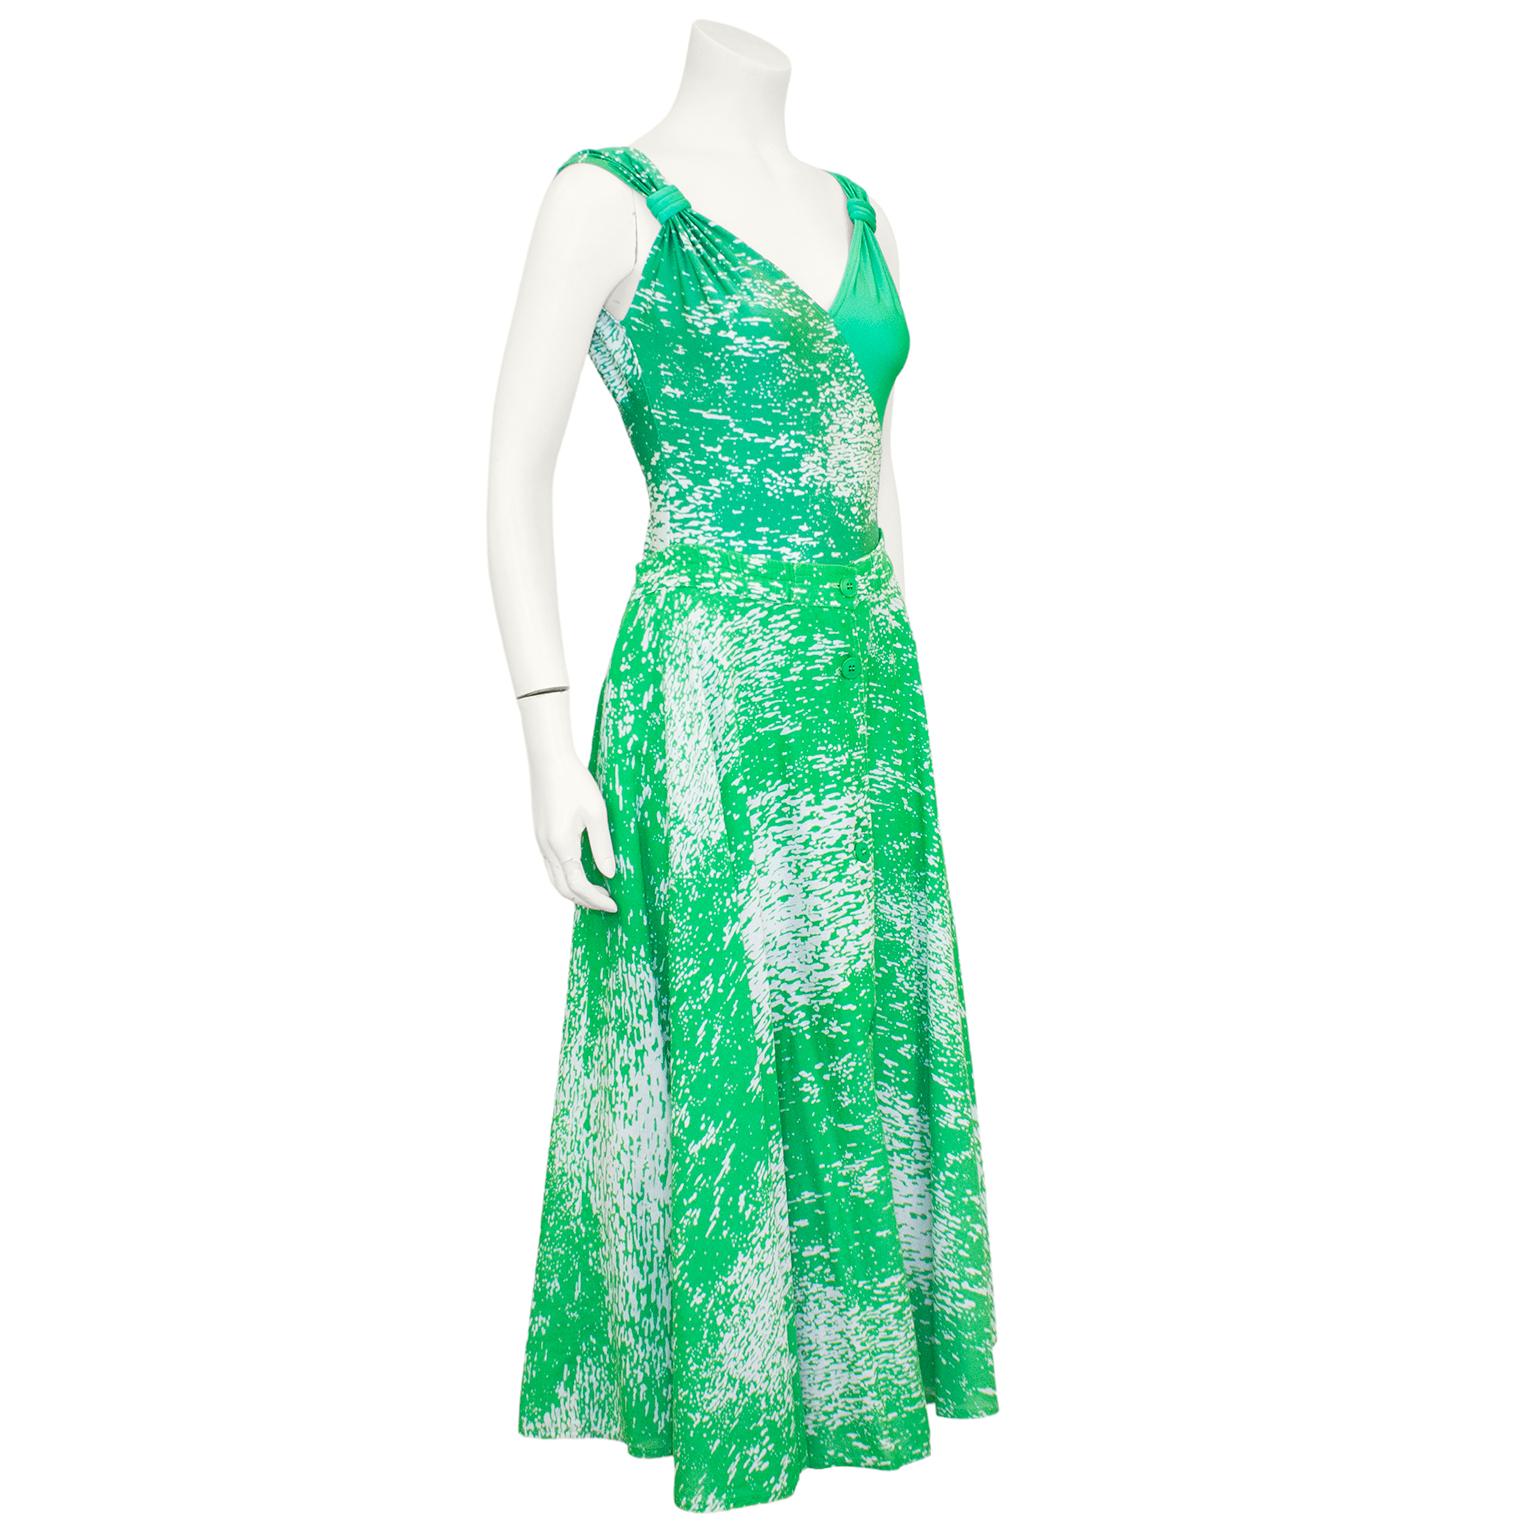 Fun and vibrant Valentino green and white printed acid wash ensemble from the 1980s. One piece bathing suit is half solid green and half printed with a v neck line and gathered straps. It can also be worn as a bodysuit. The matching circle skirt is